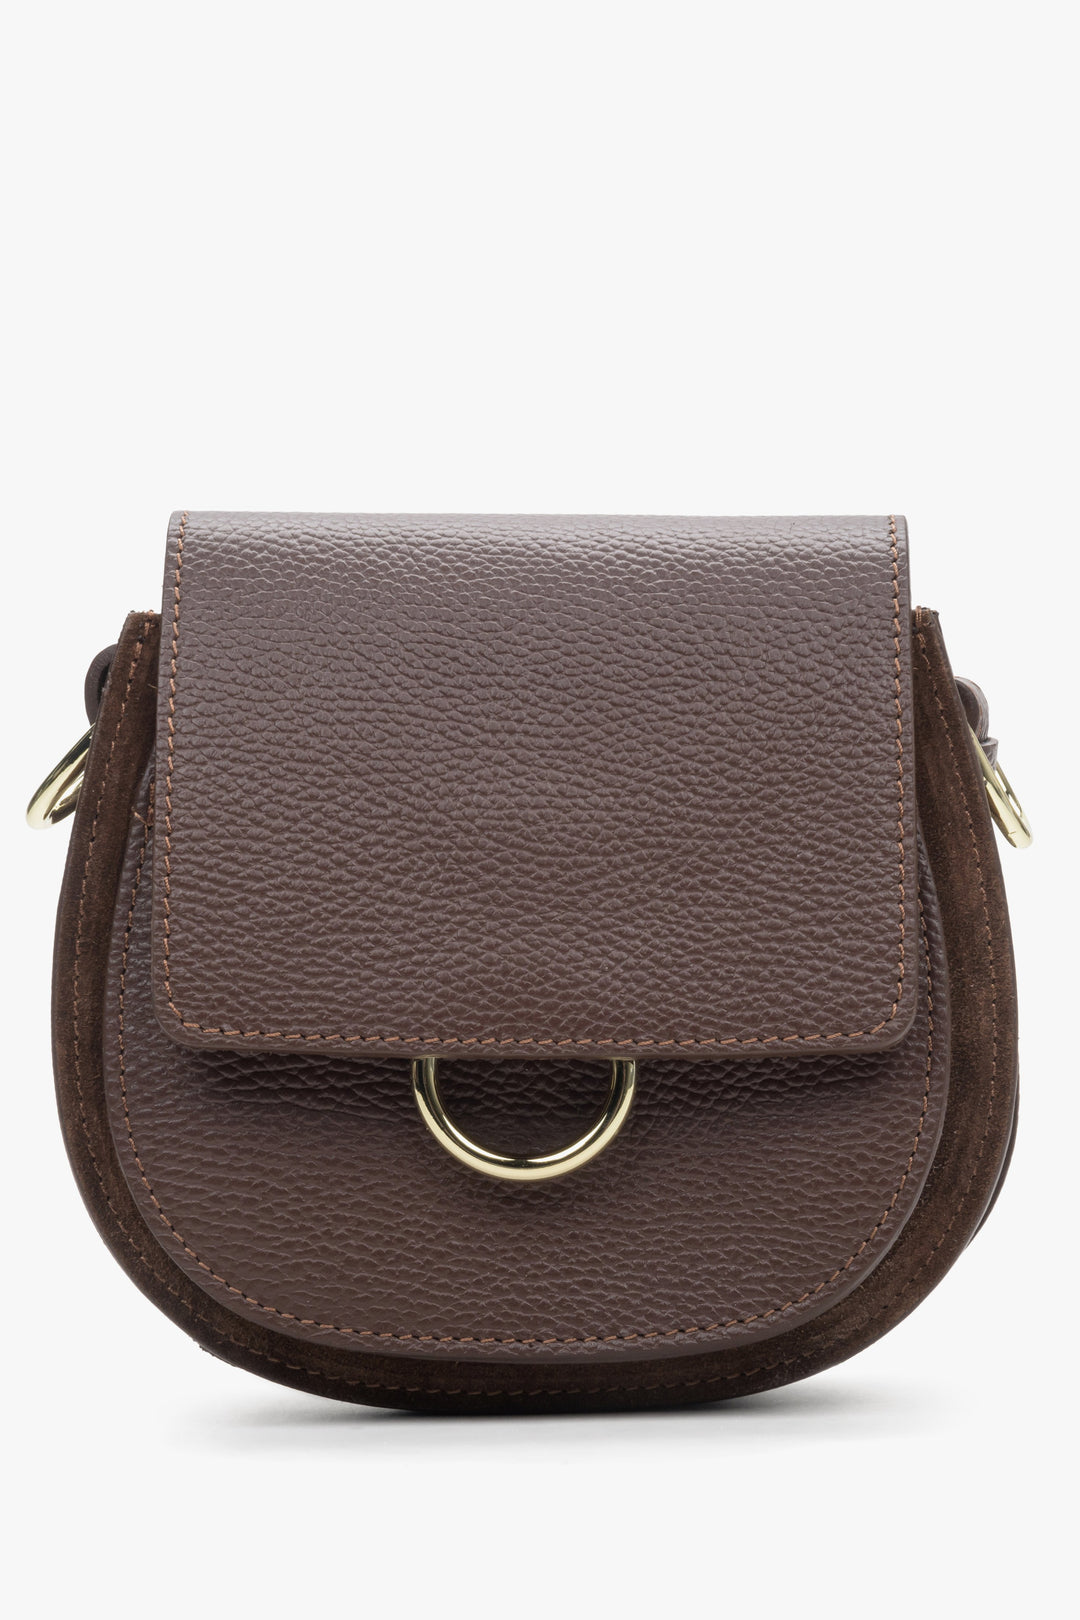 Women's saddle brown crossbody bag made in Italy.